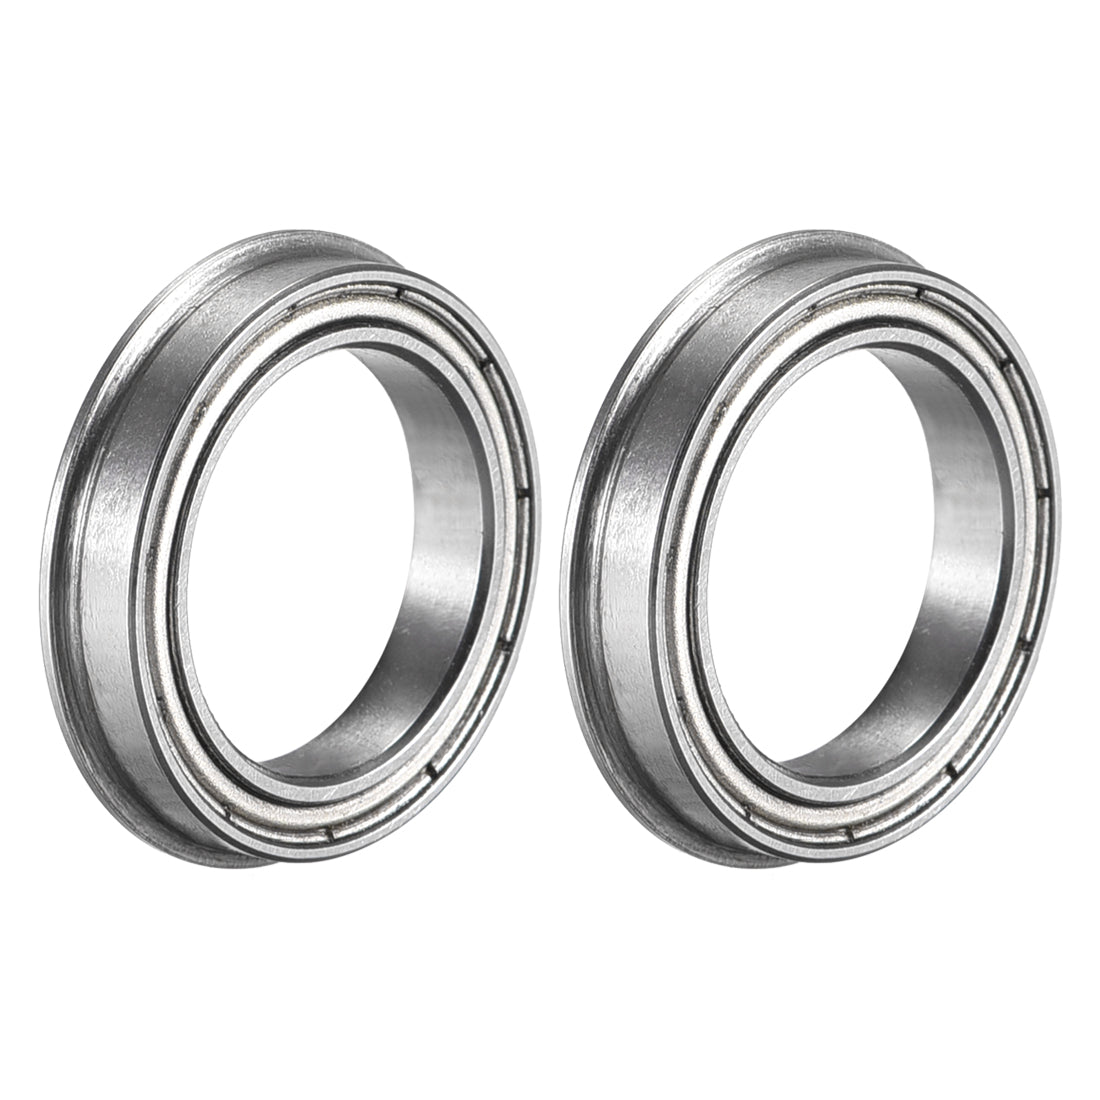 uxcell Uxcell F6702ZZ Flange Ball Bearing 15x21x4mm Double Shielded Chrome Steel Bearings 2pcs